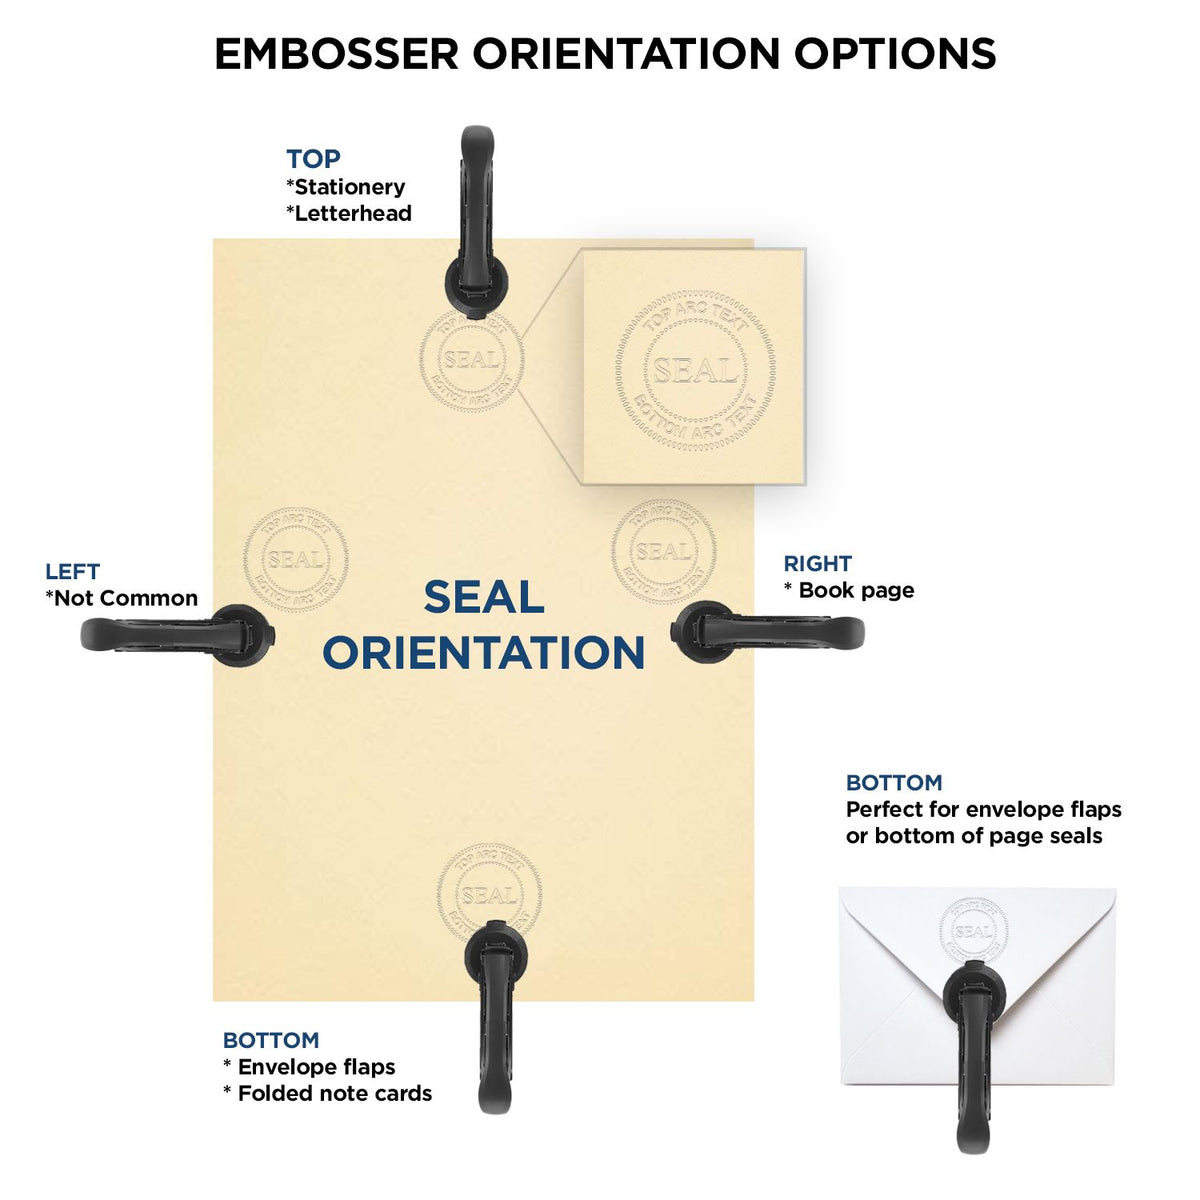 An infographic for the State of Mississippi Soft Land Surveyor Embossing Seal showing embosser orientation, this is showing examples of a top, bottom, right and left insert.